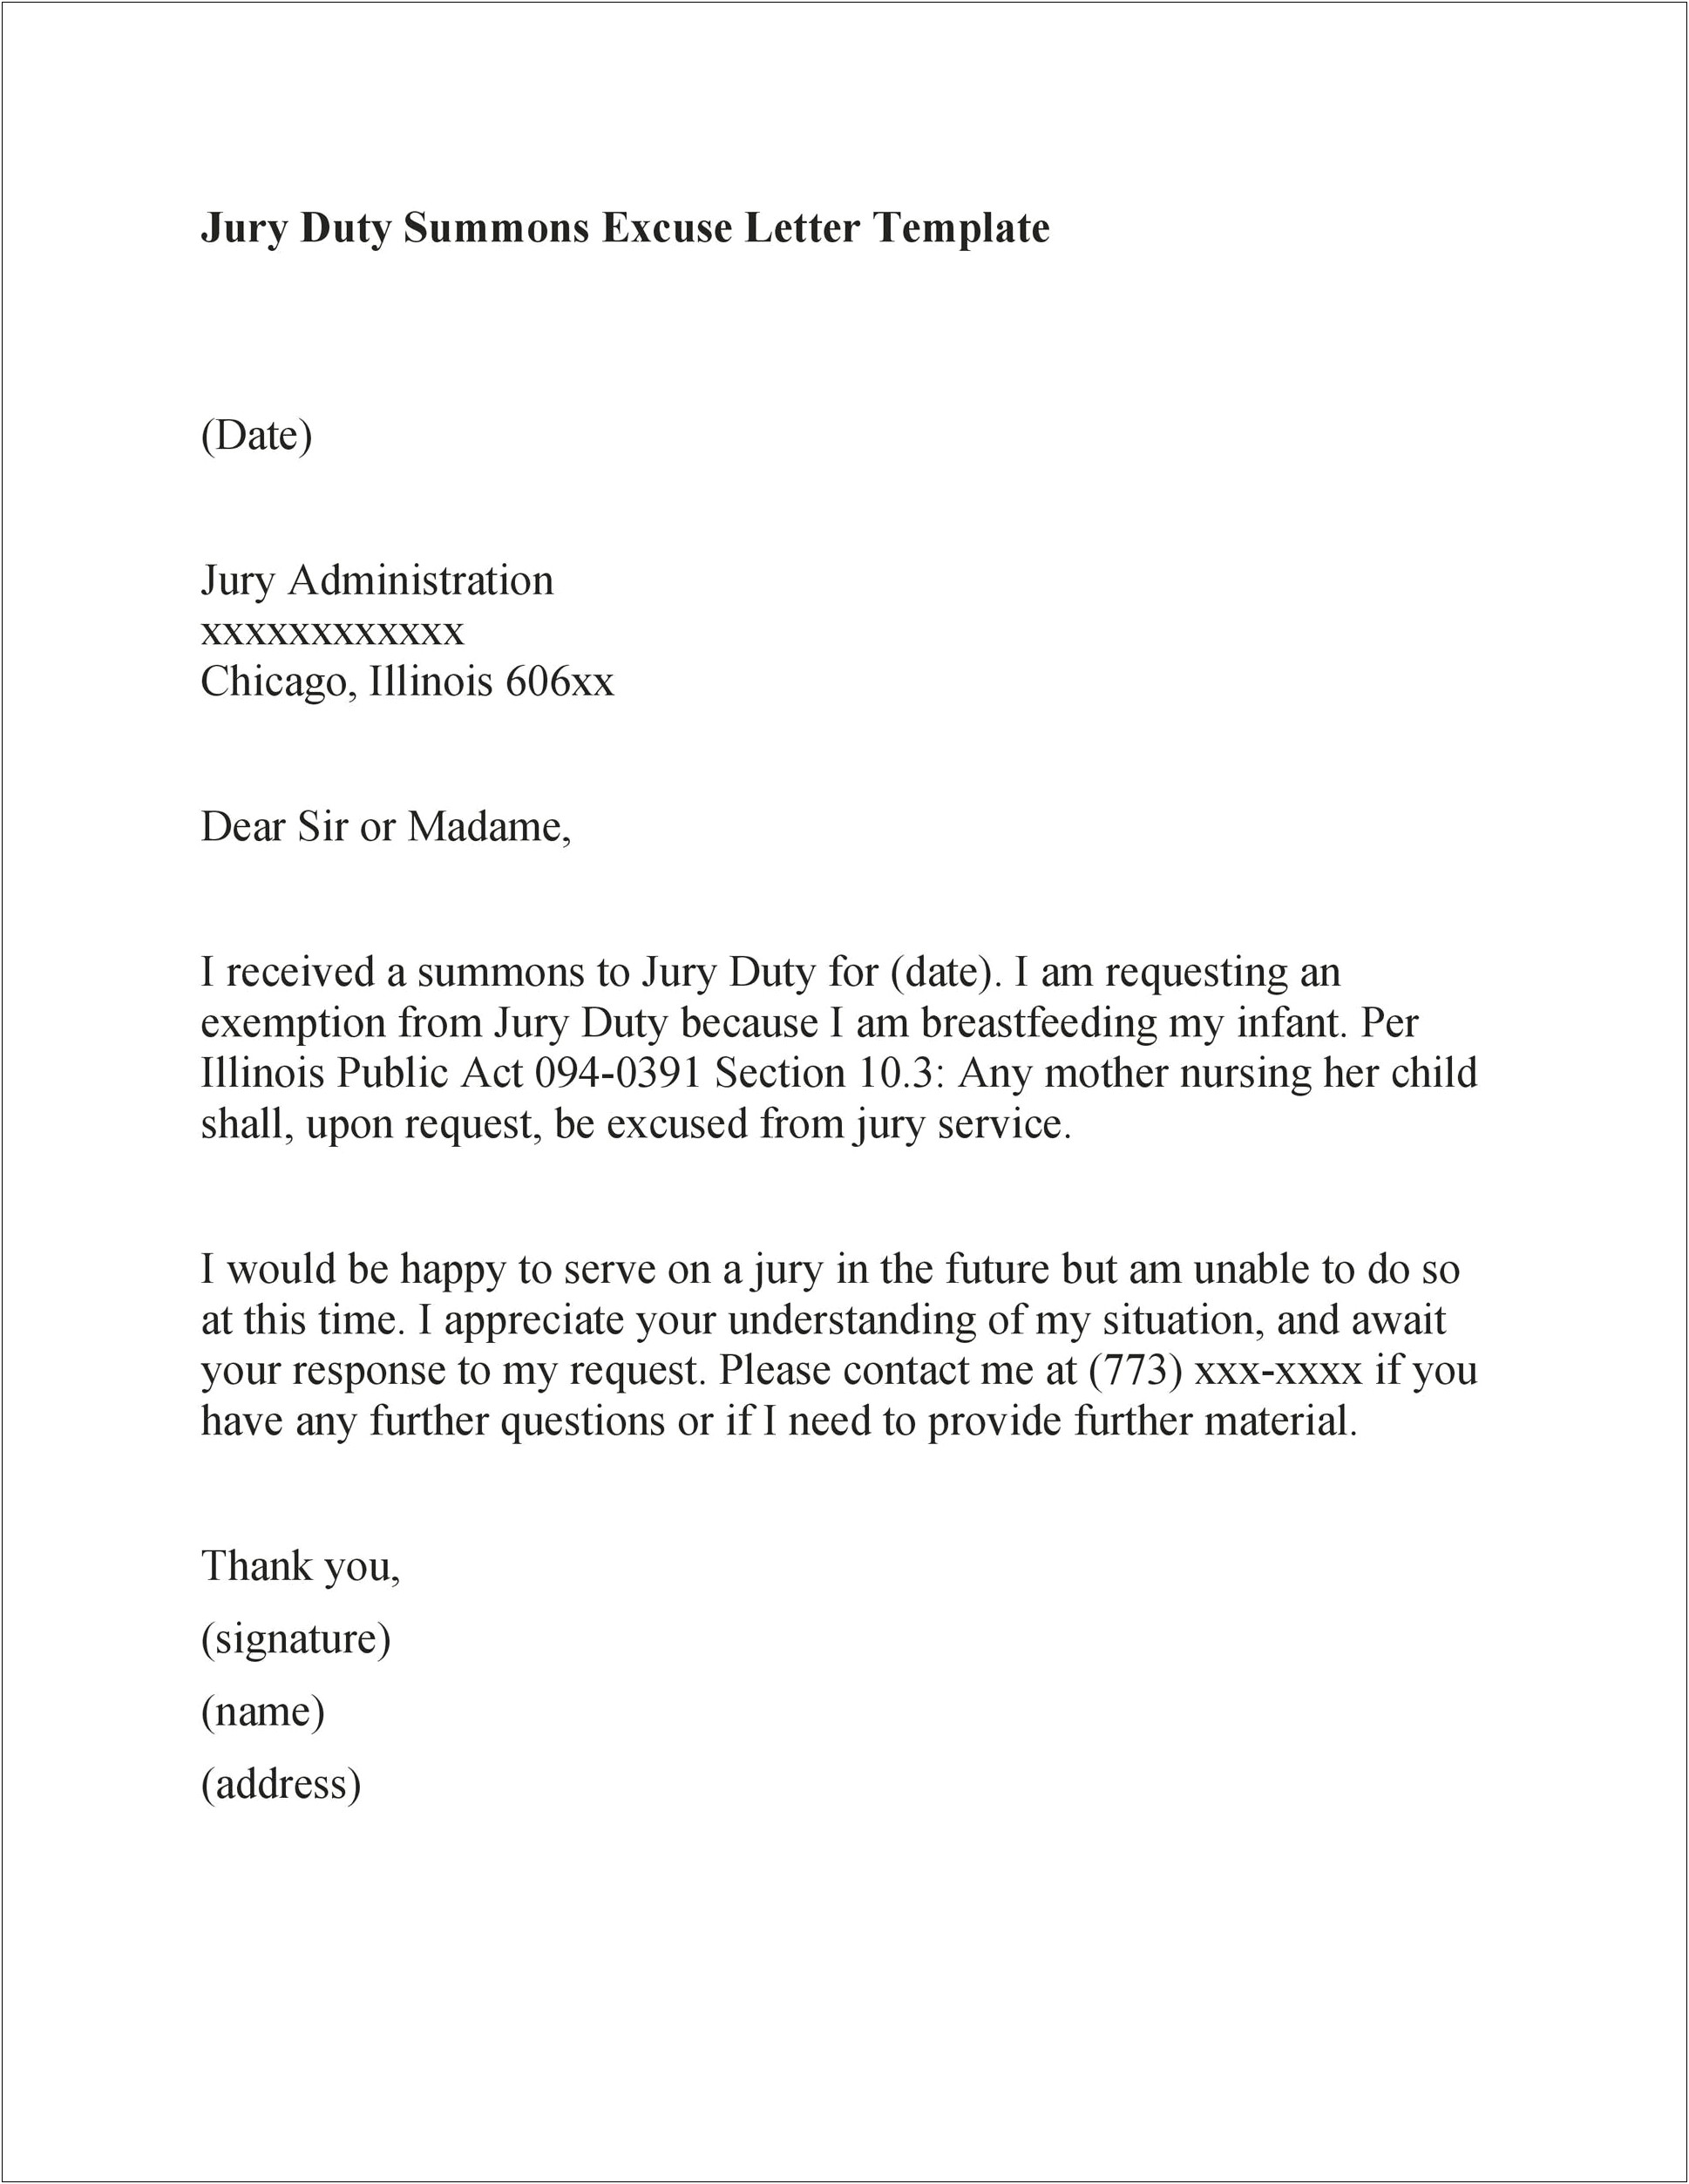 Jury Duty Medical Excuse Letter Template